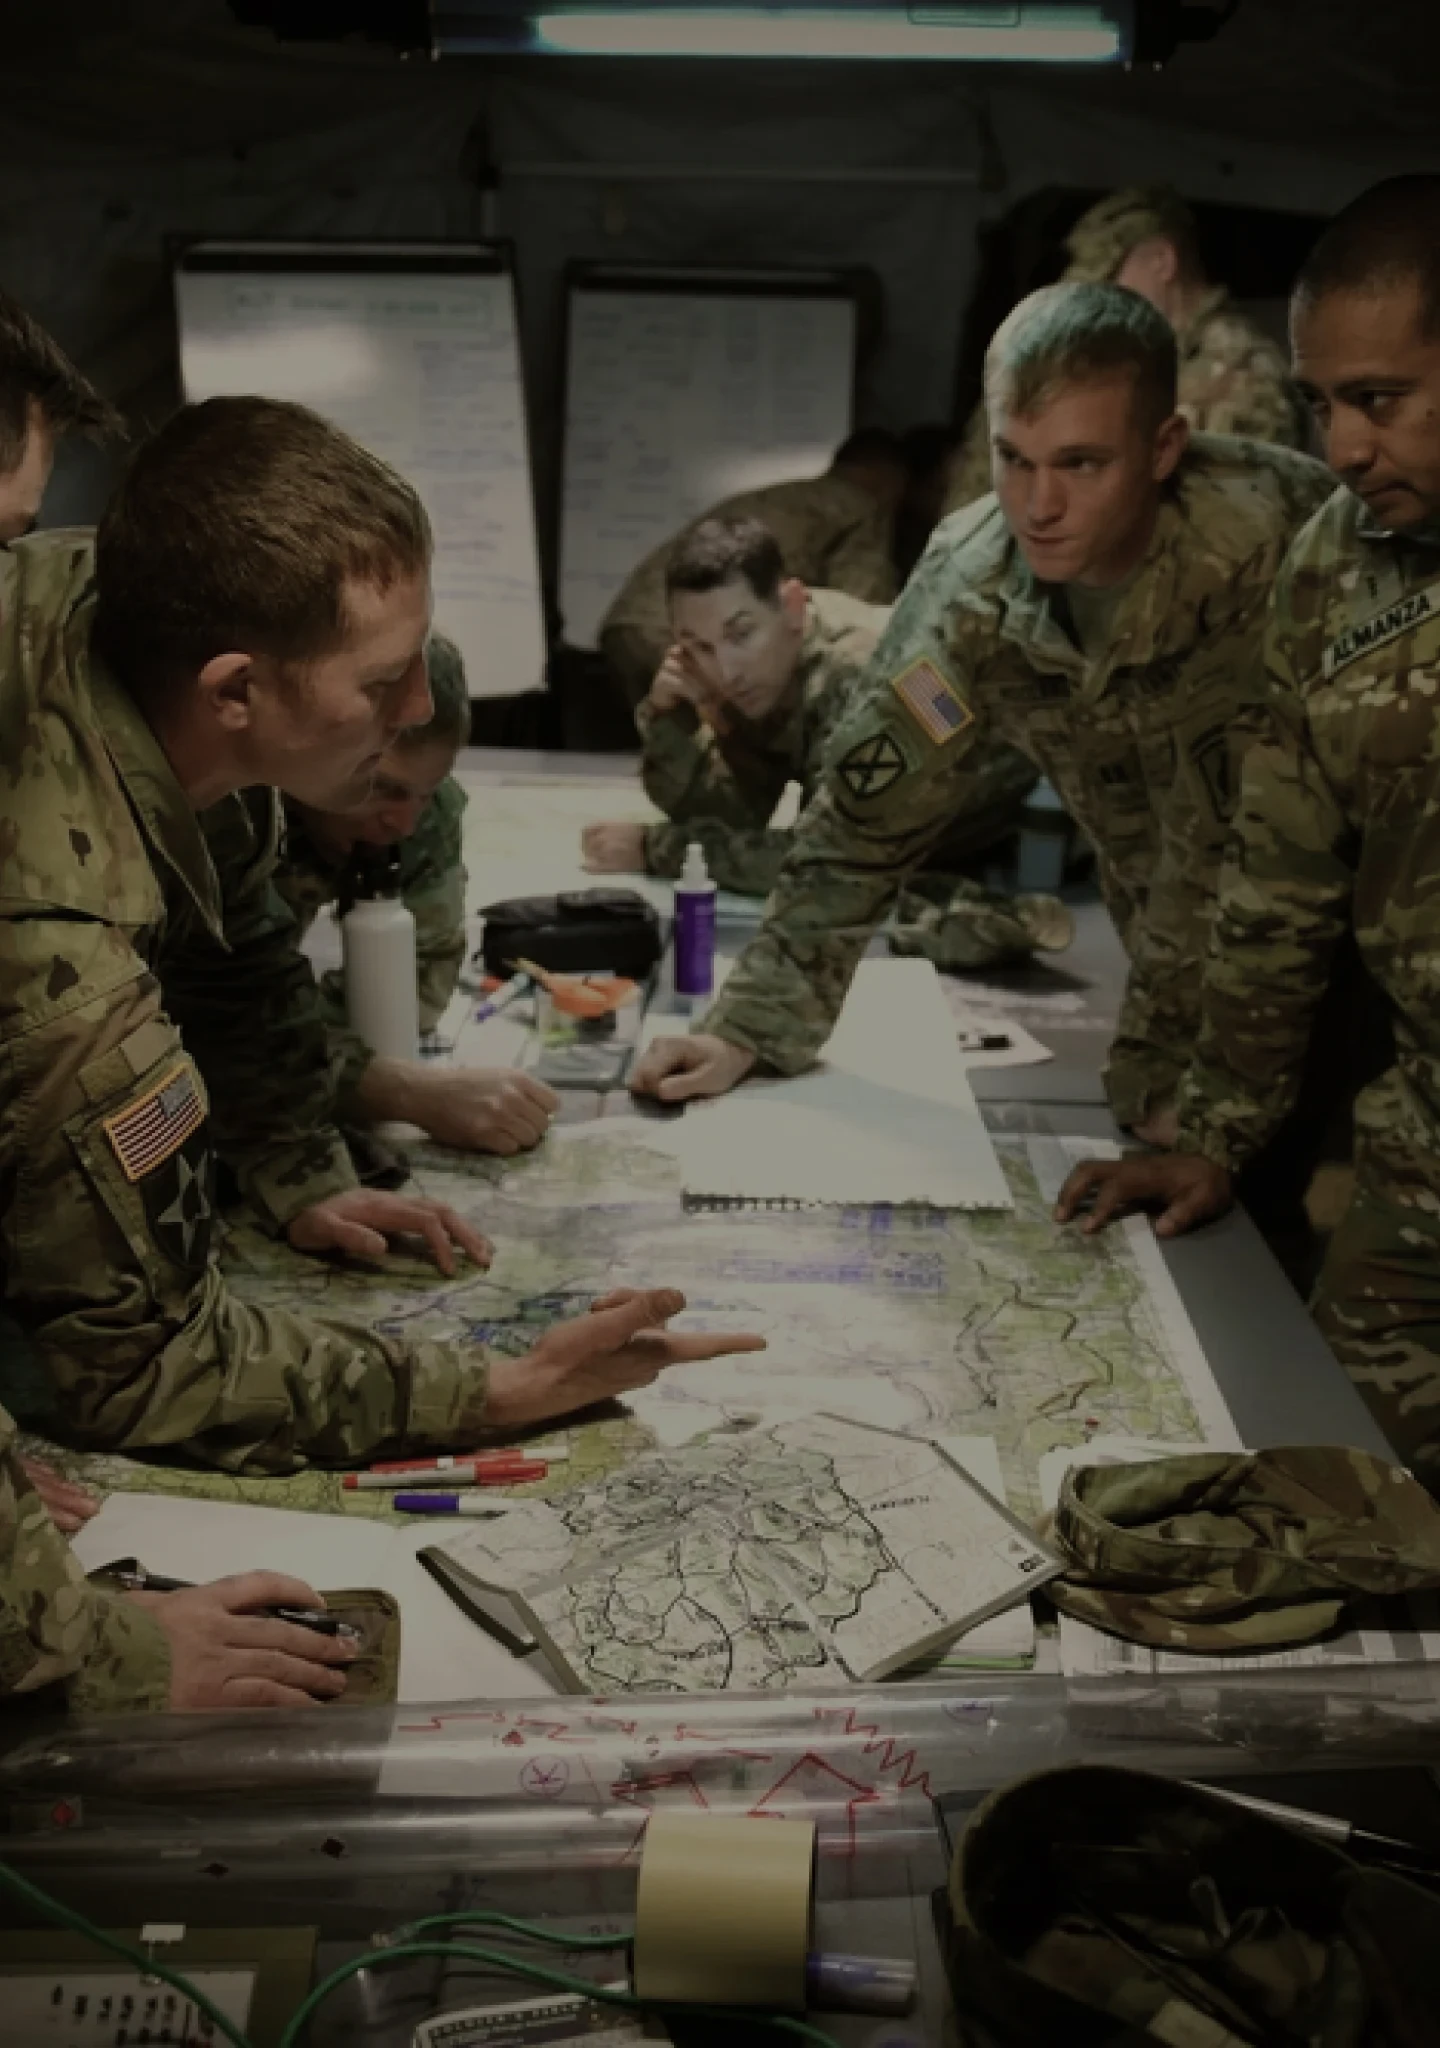 A group of Soldiers gathered around a table looking at maps